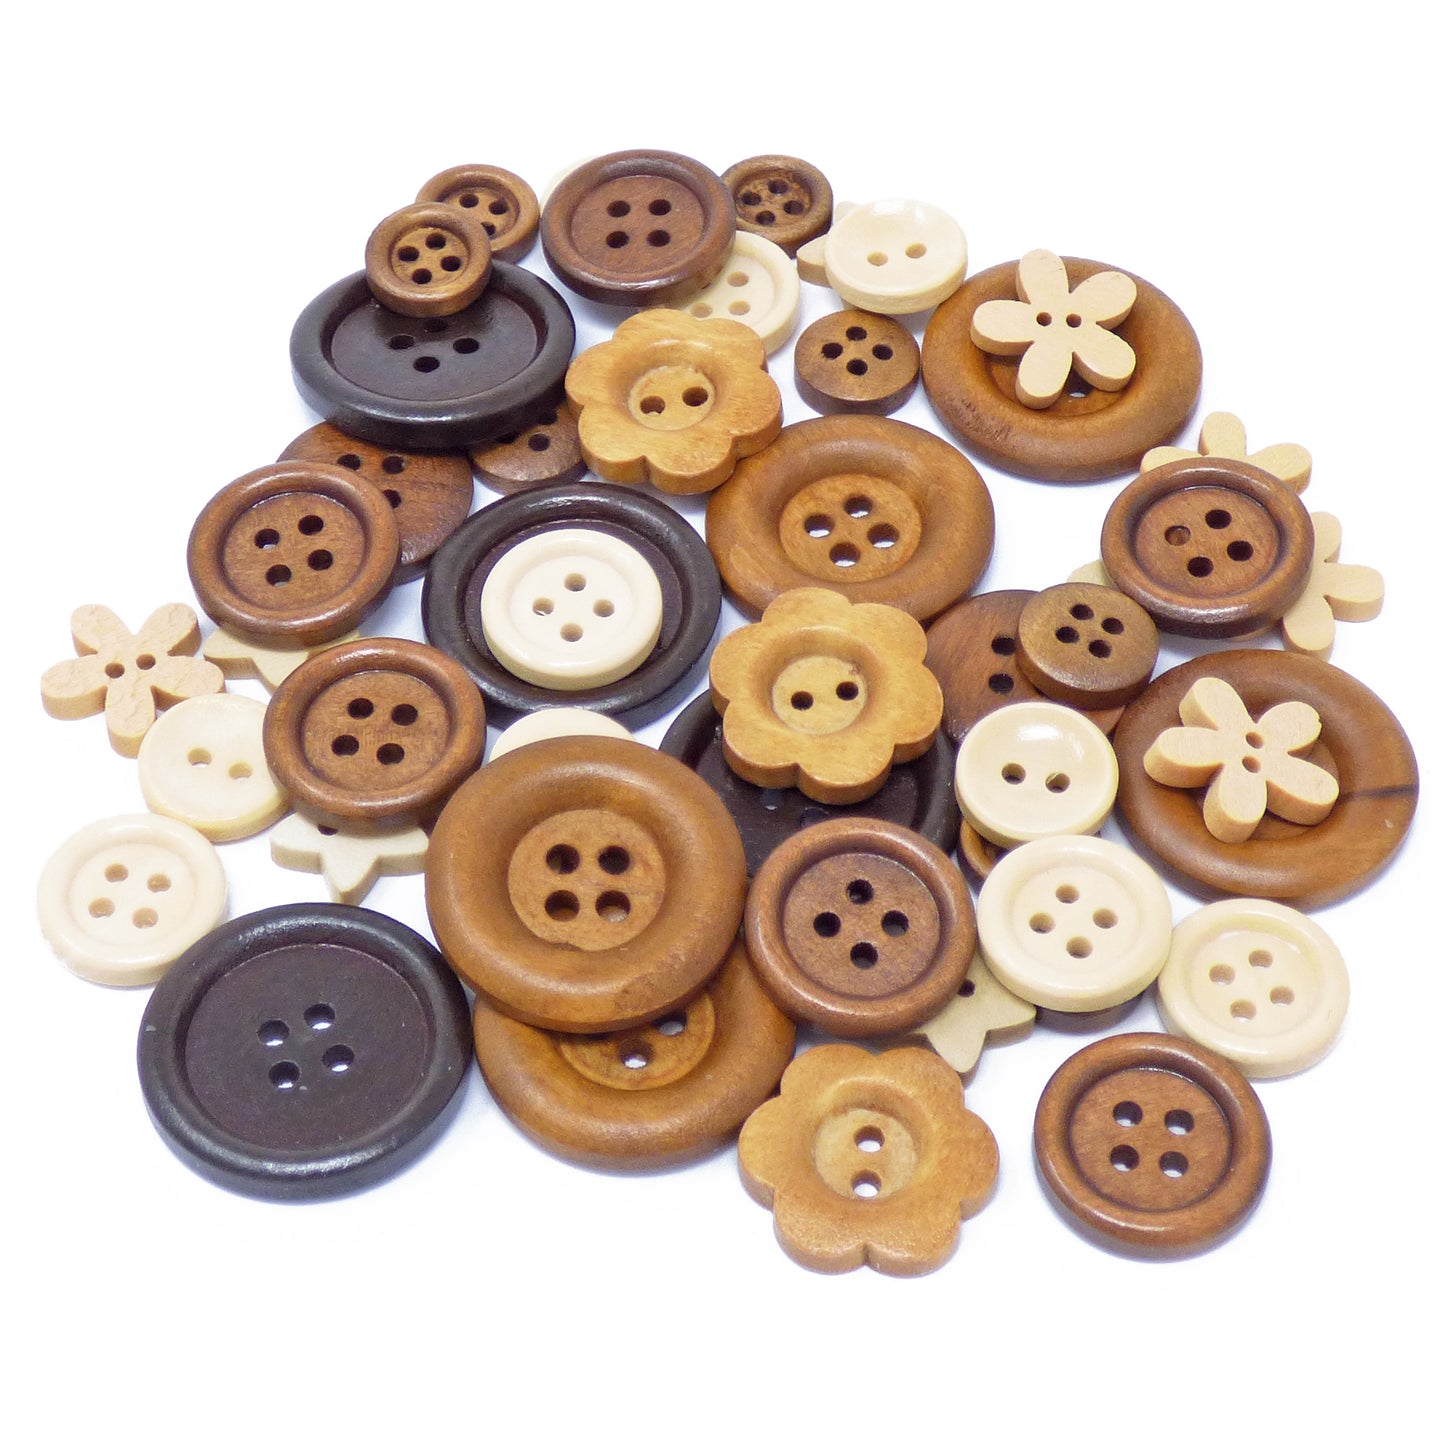 50 Mix Natural Shabby Chic Wood Buttons